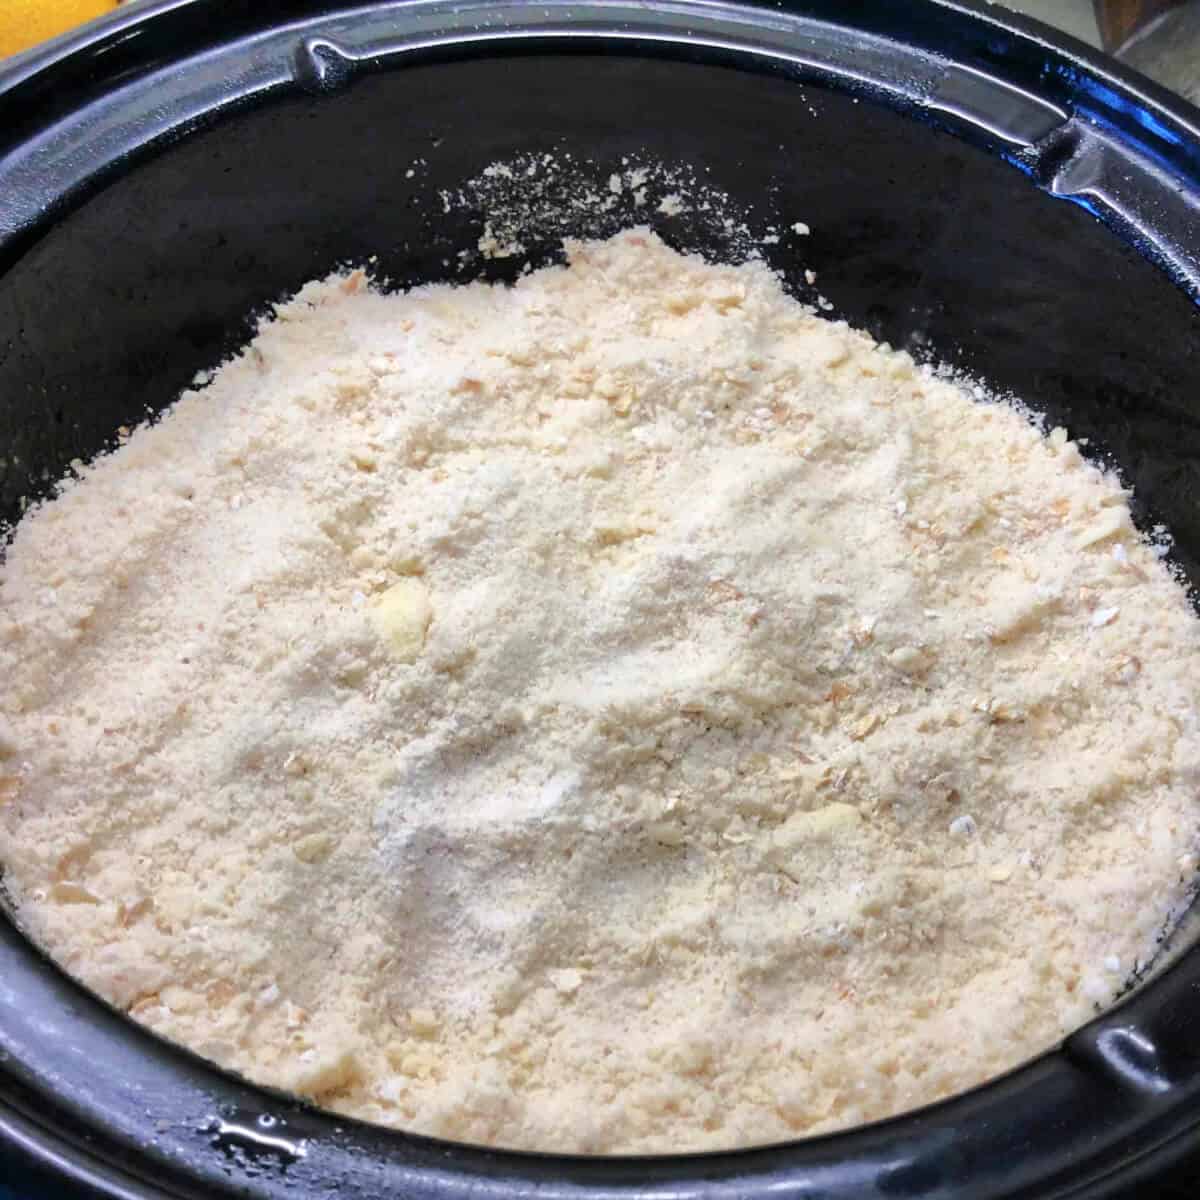 Crumble assembled in slow cooker.